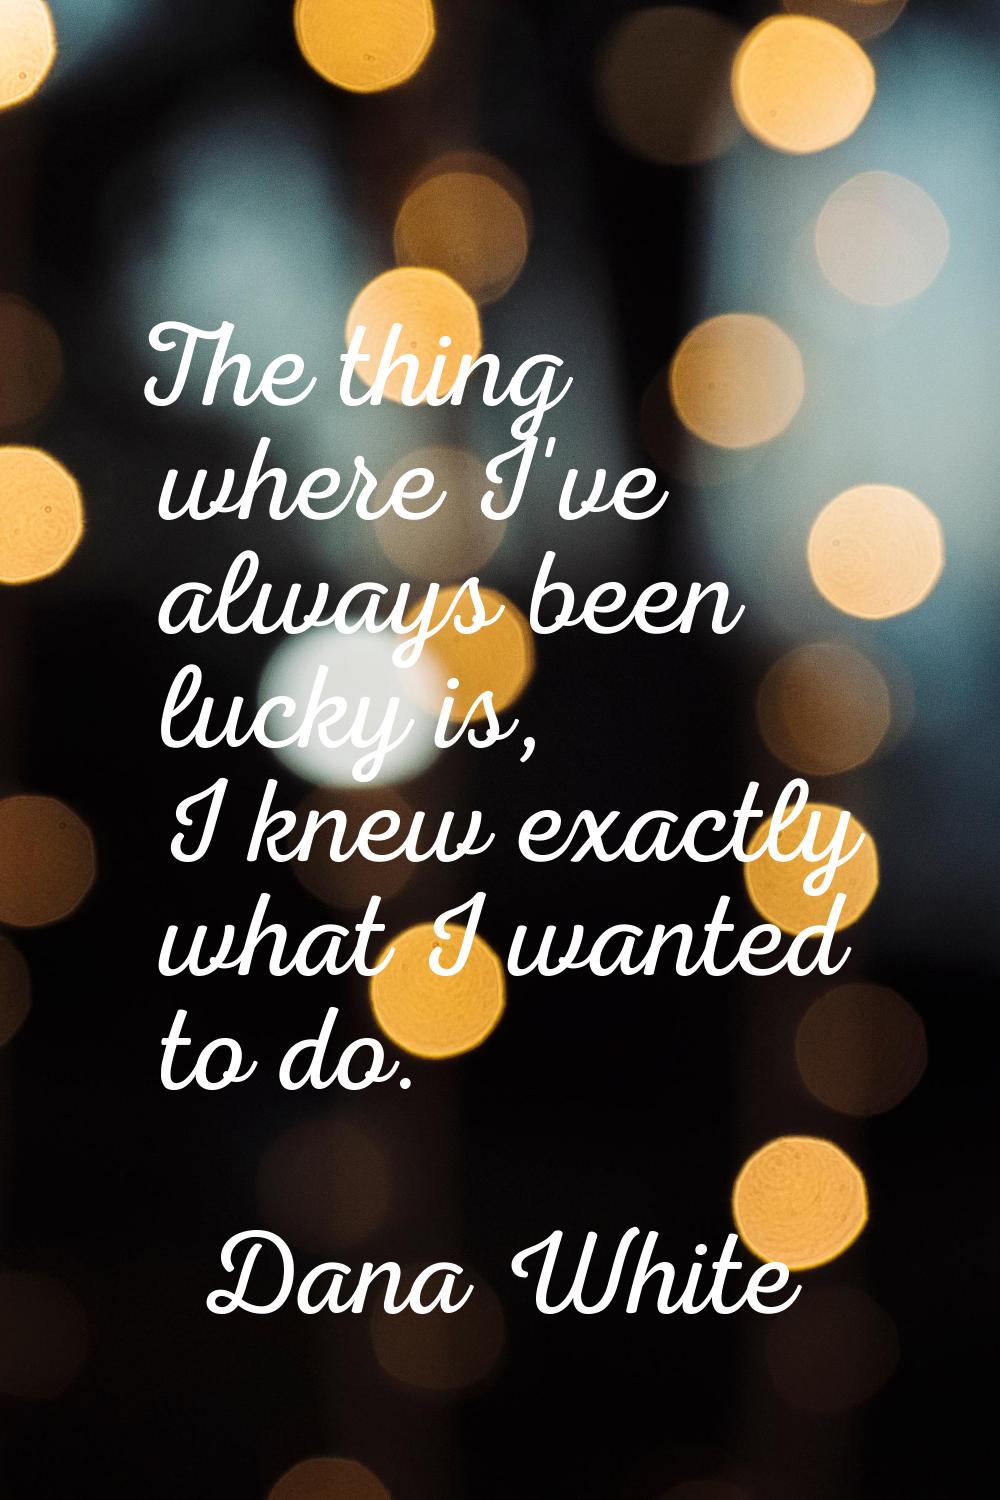 The thing where I've always been lucky is, I knew exactly what I wanted to do.